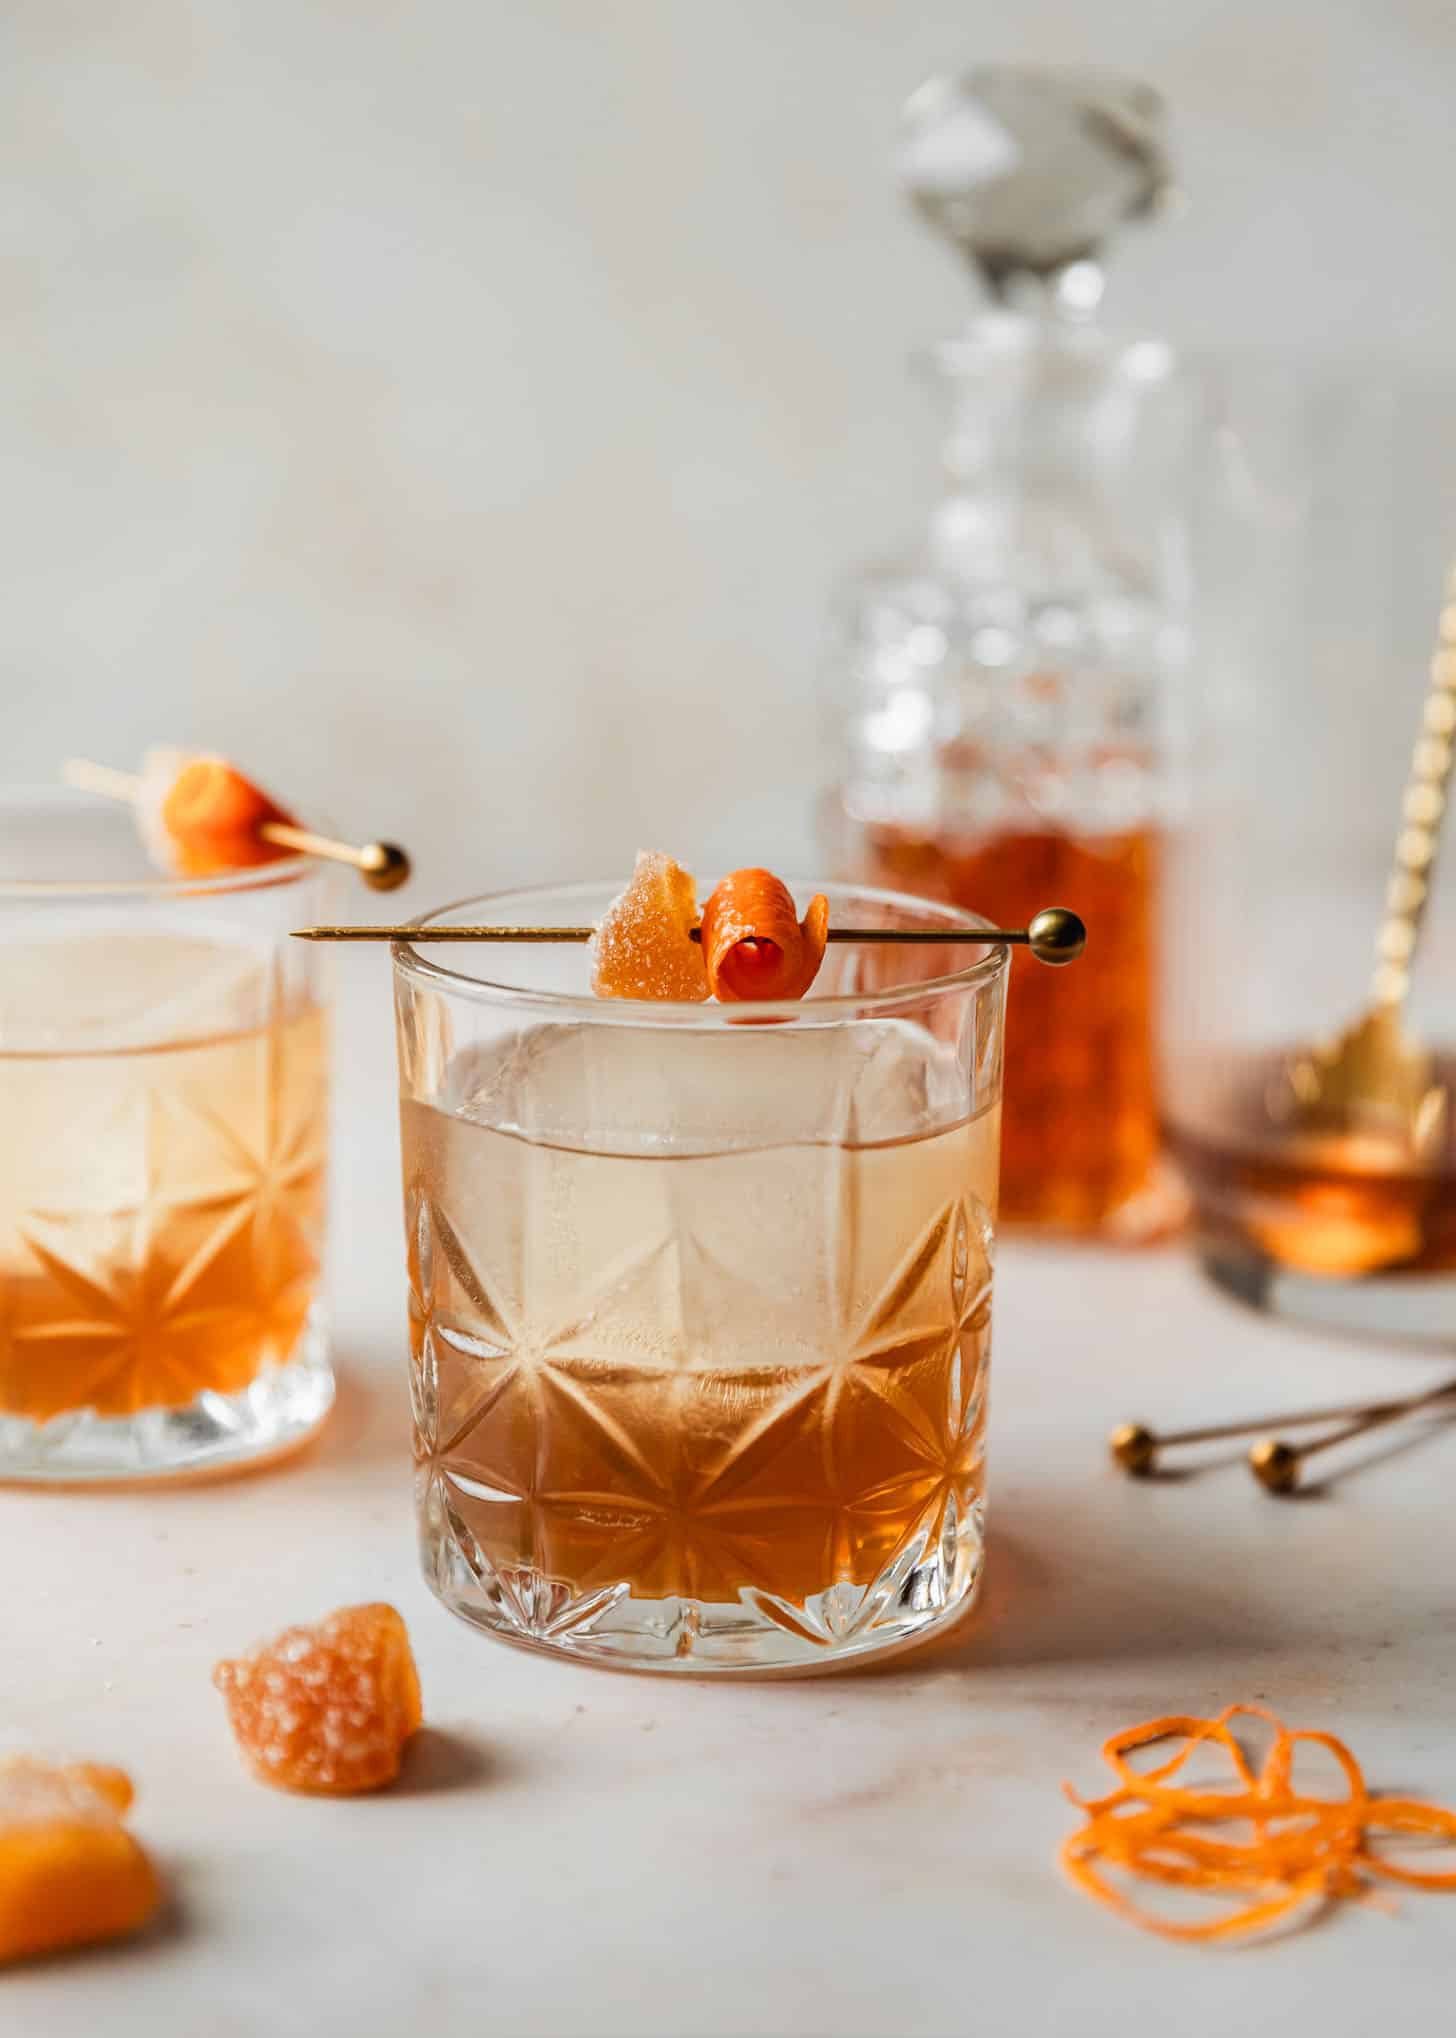 Two ginger old fashioned cocktails on a beige counter next to a cocktail mixer, decanter of bourbon, crystalized ginger, and orange peels.